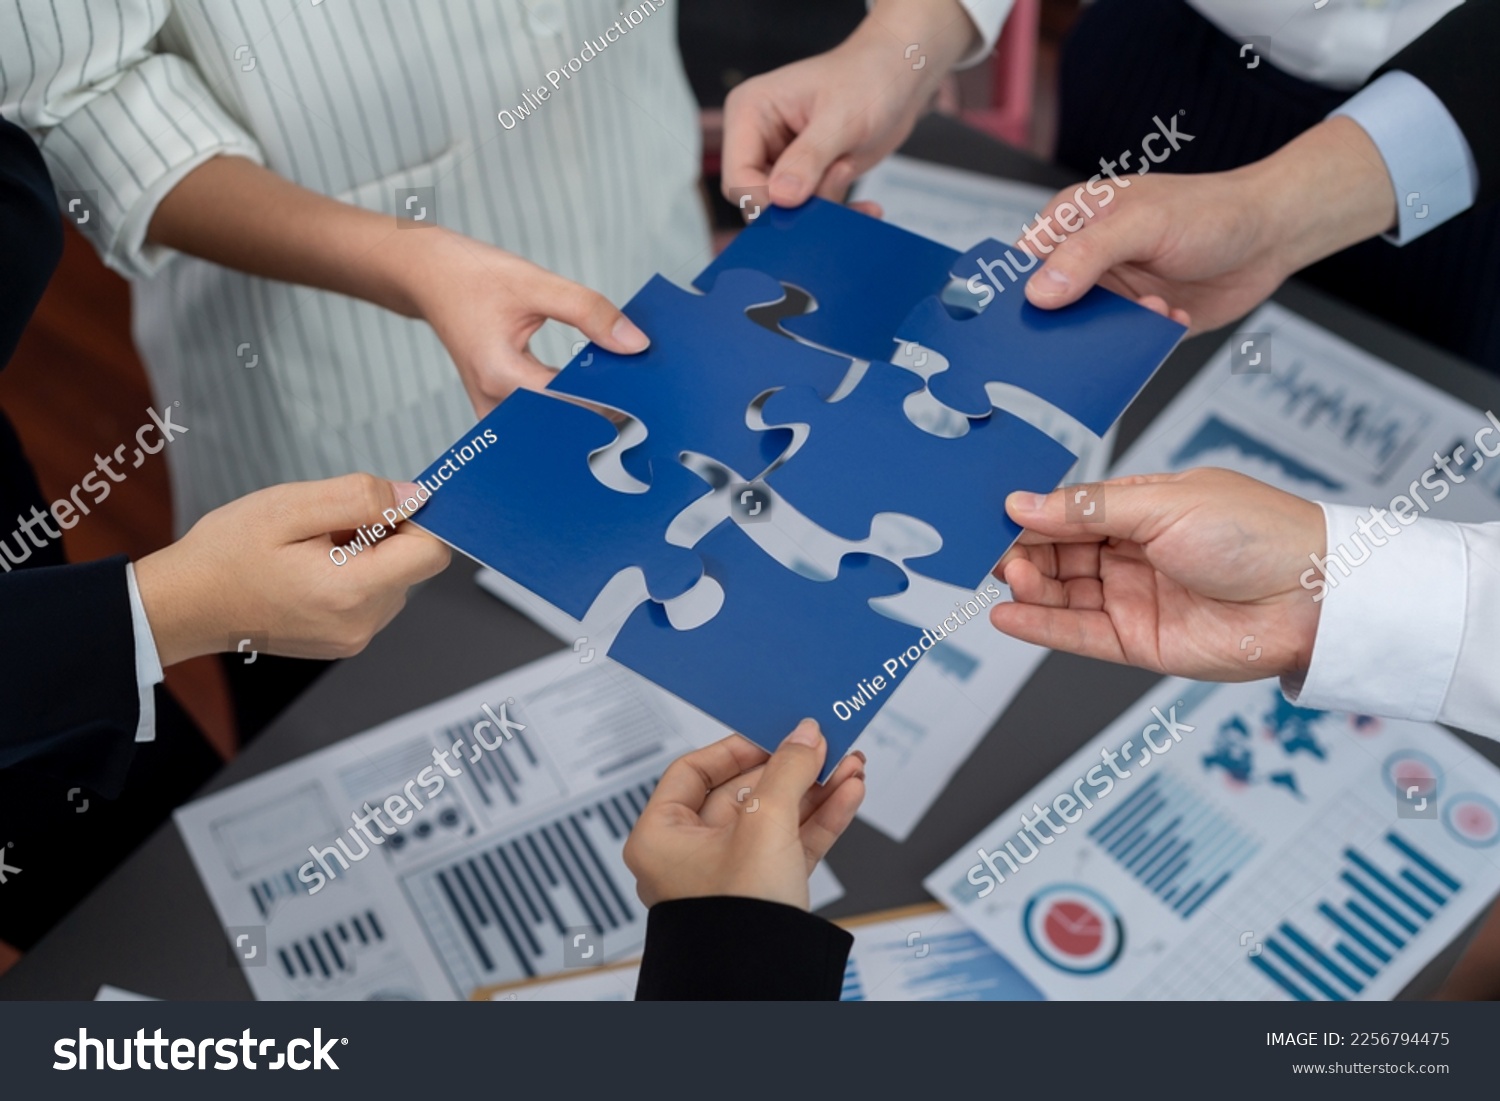 Closeup top view business team of office worker putting jigsaw puzzle together over table filled with financial report paper in workplace with manager to promote harmony concept in meeting room. #2256794475